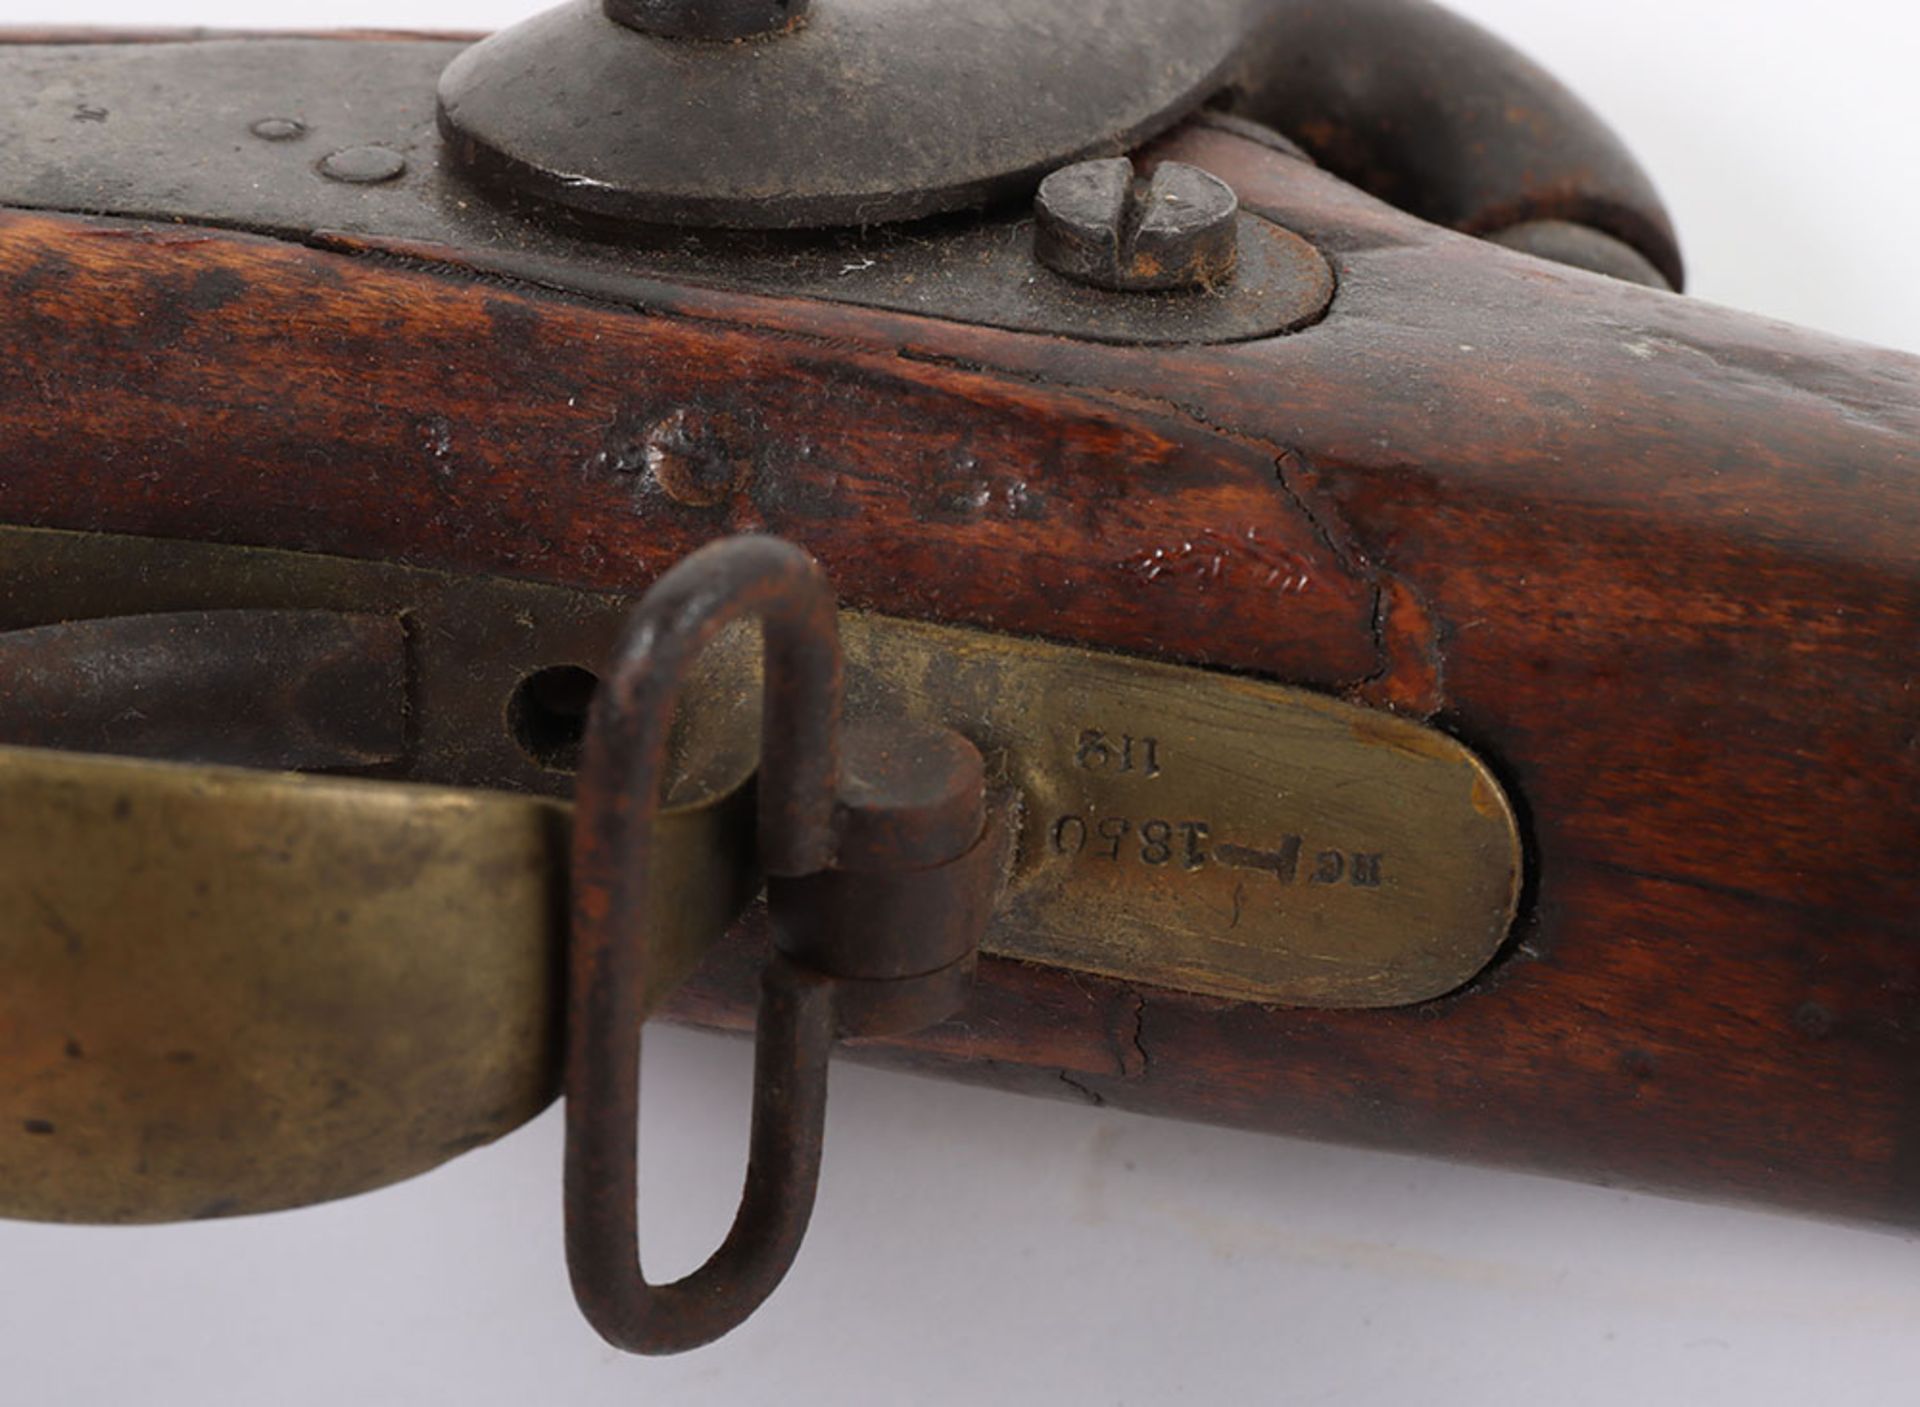 14-Bore Russian Back Action Military Musket - Image 8 of 17